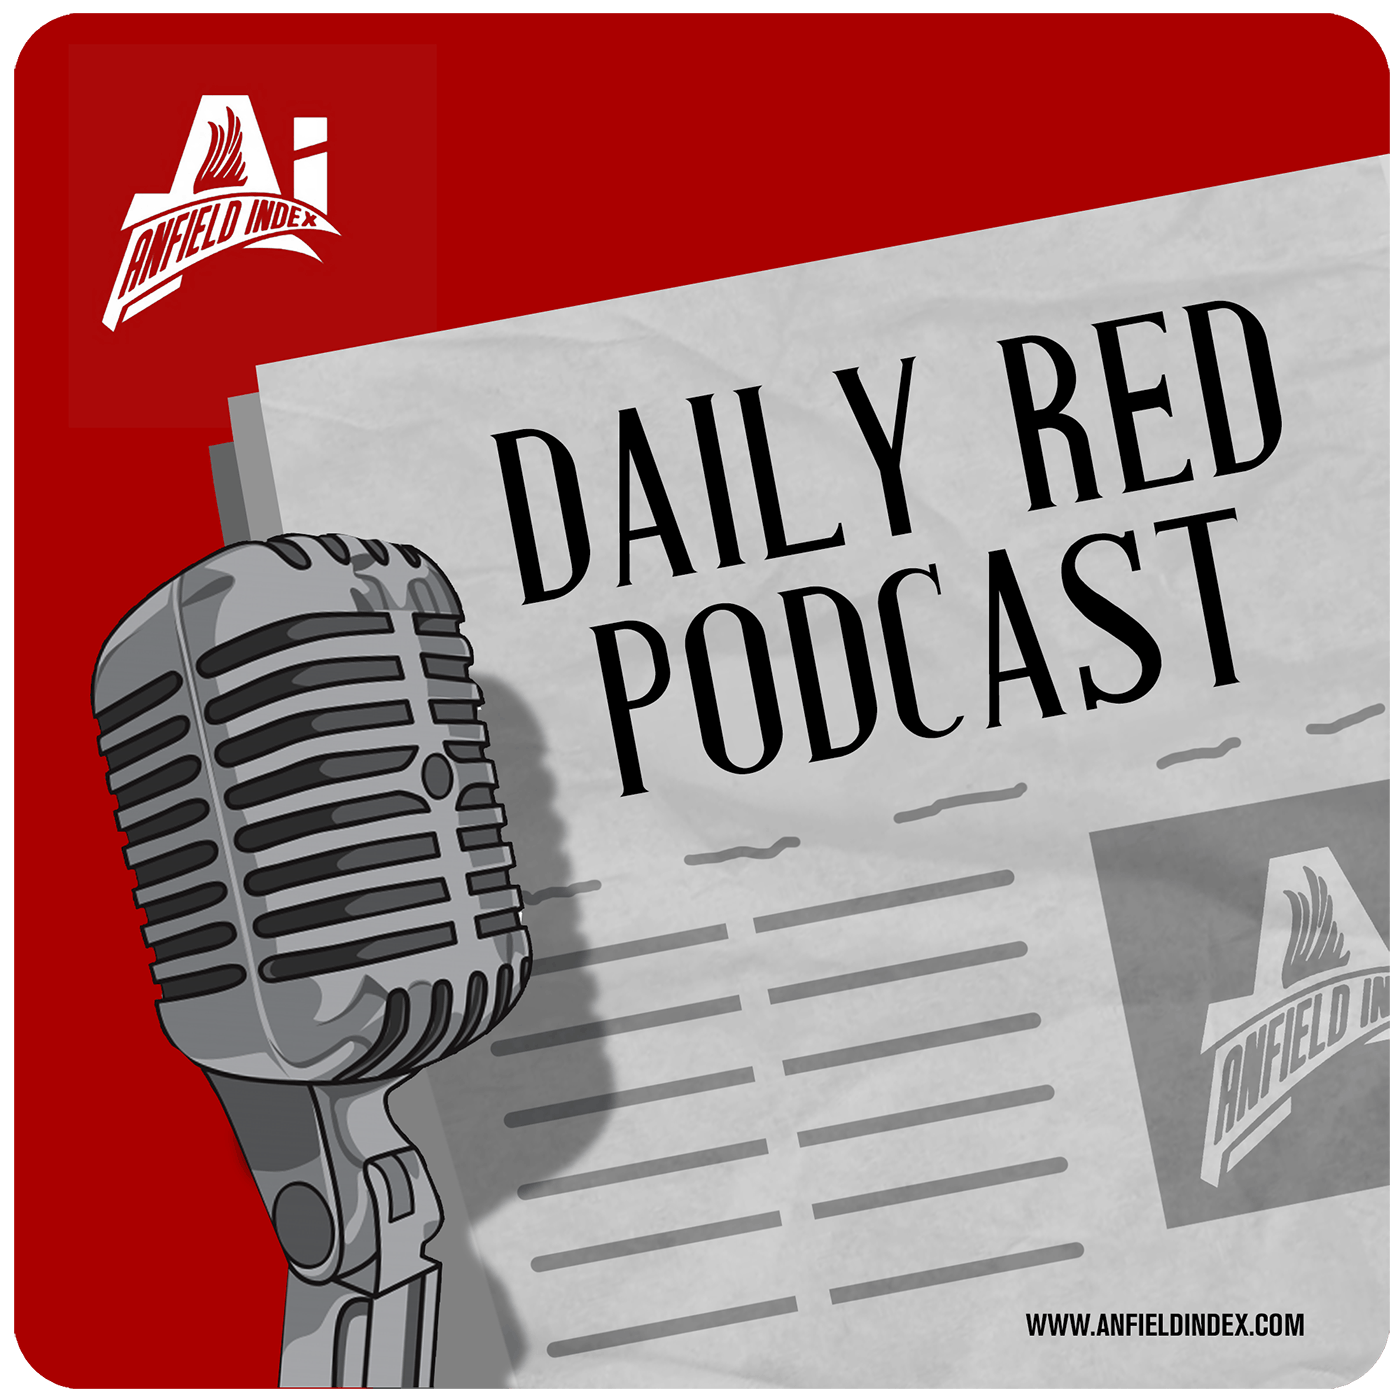 La Liga Players: Daily Red Podcast